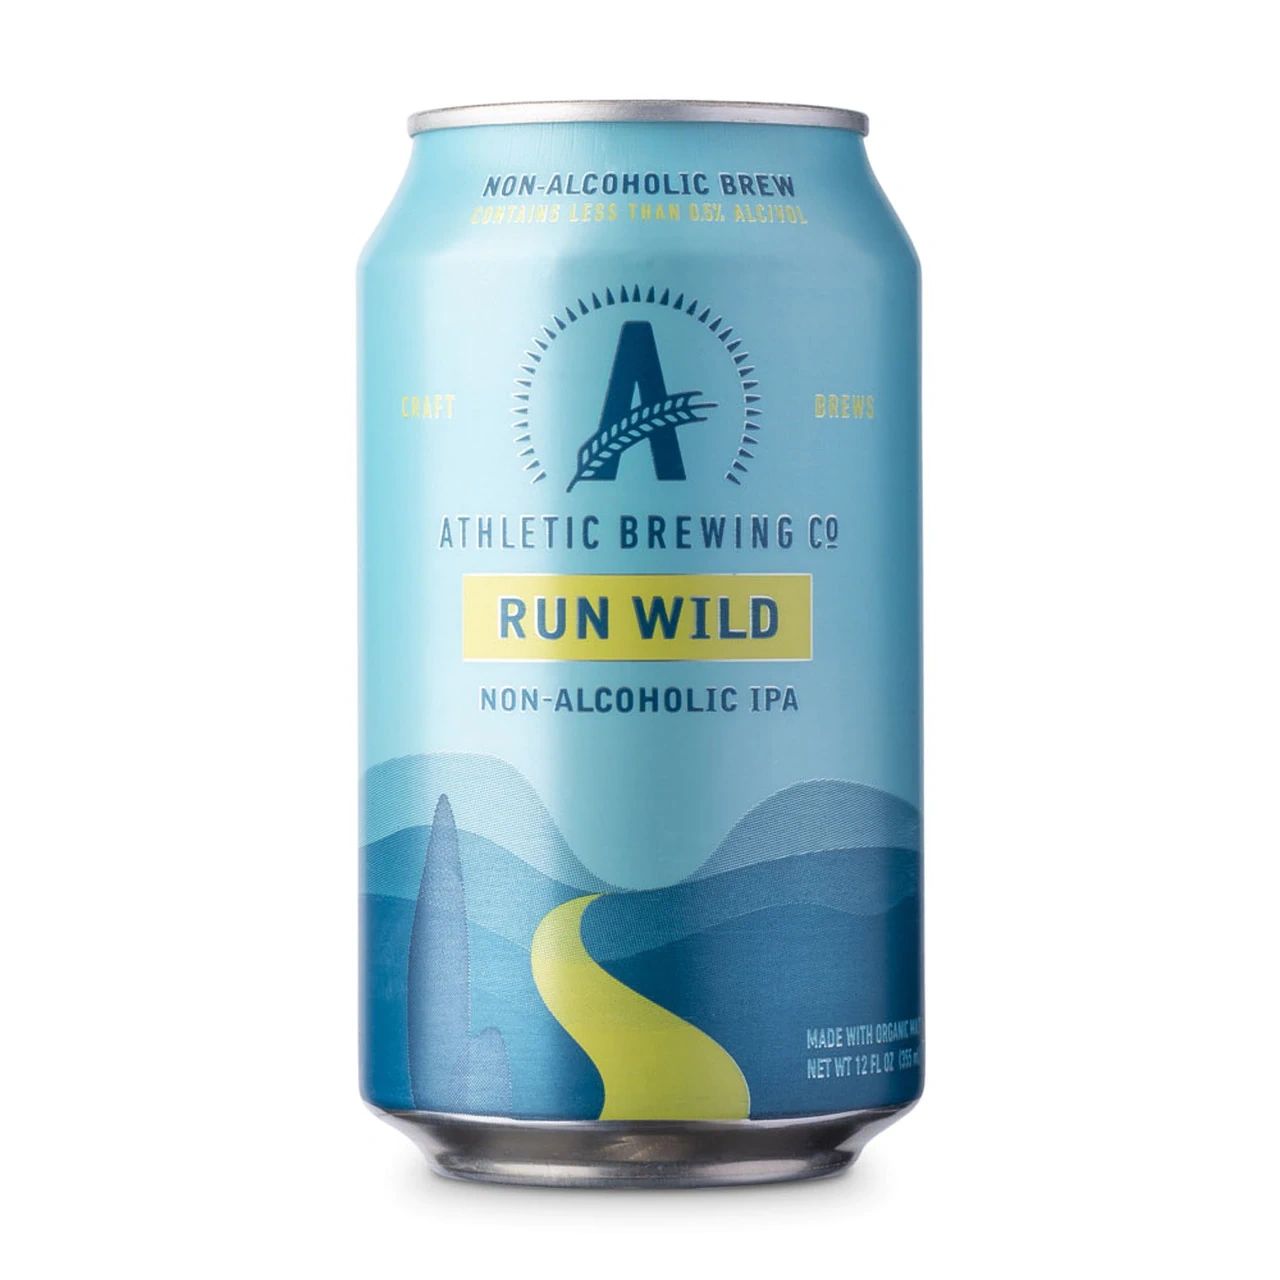 Run Wild Non Alcoholic IPA from Athletic Brewing Company